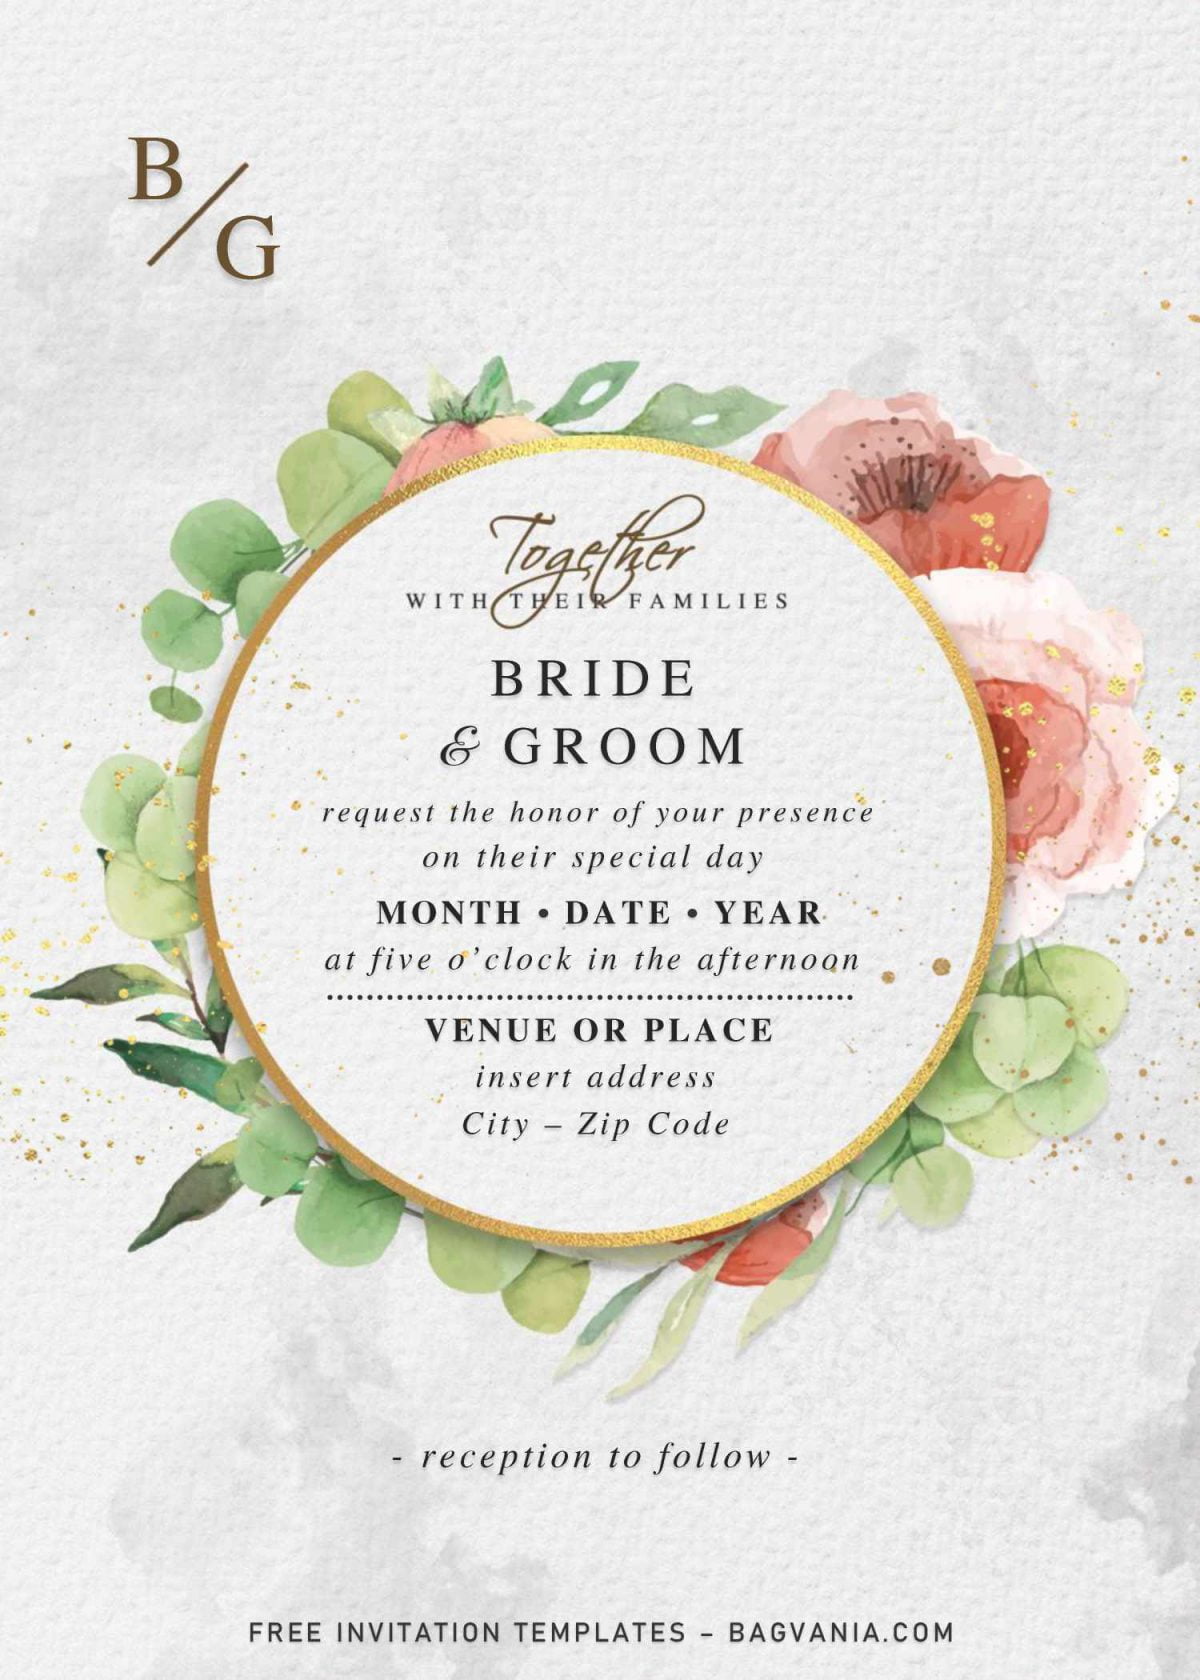 Free Vintage Floral Wedding Invitation Templates For Word and has canvas background